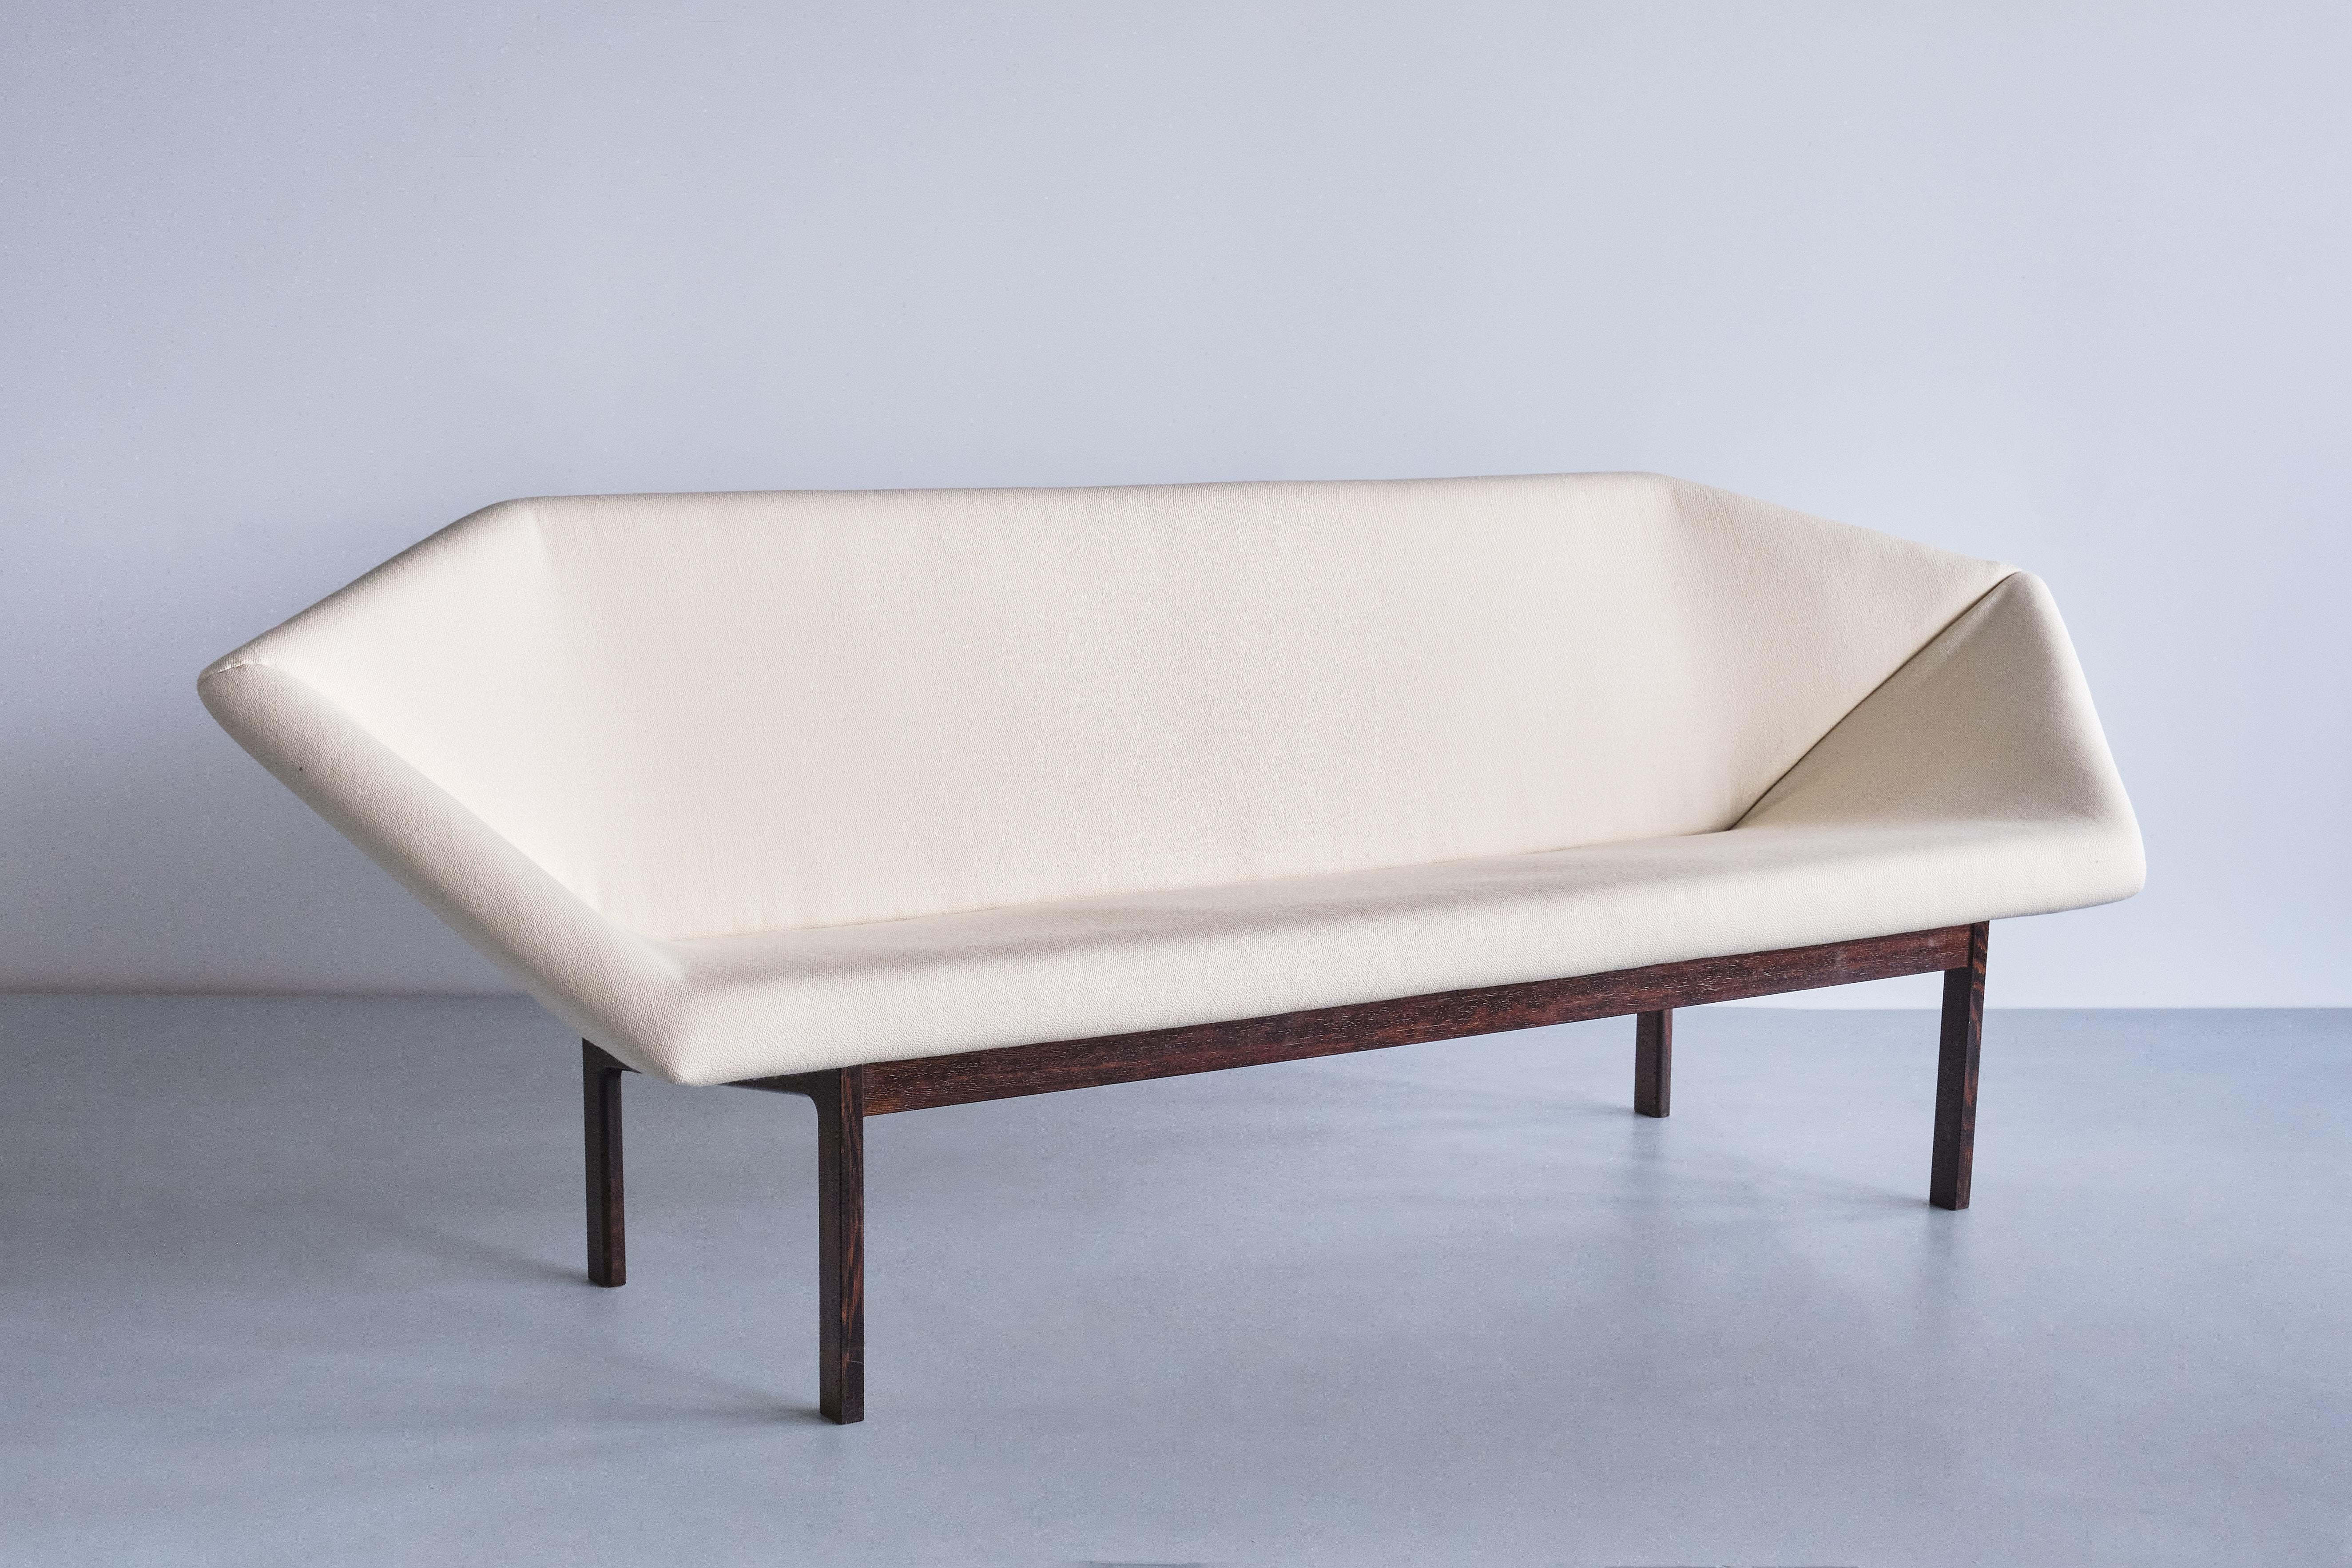 This extremely rare sofa named Prisma was designed by Tove & Edvard Kindt-Larsen in 1963. It was produced by the cabinetmaker Ludvig Pontoppidan in Denmark.

The distinct design is marked by the elongated, geometric shape of the upholstered seat and